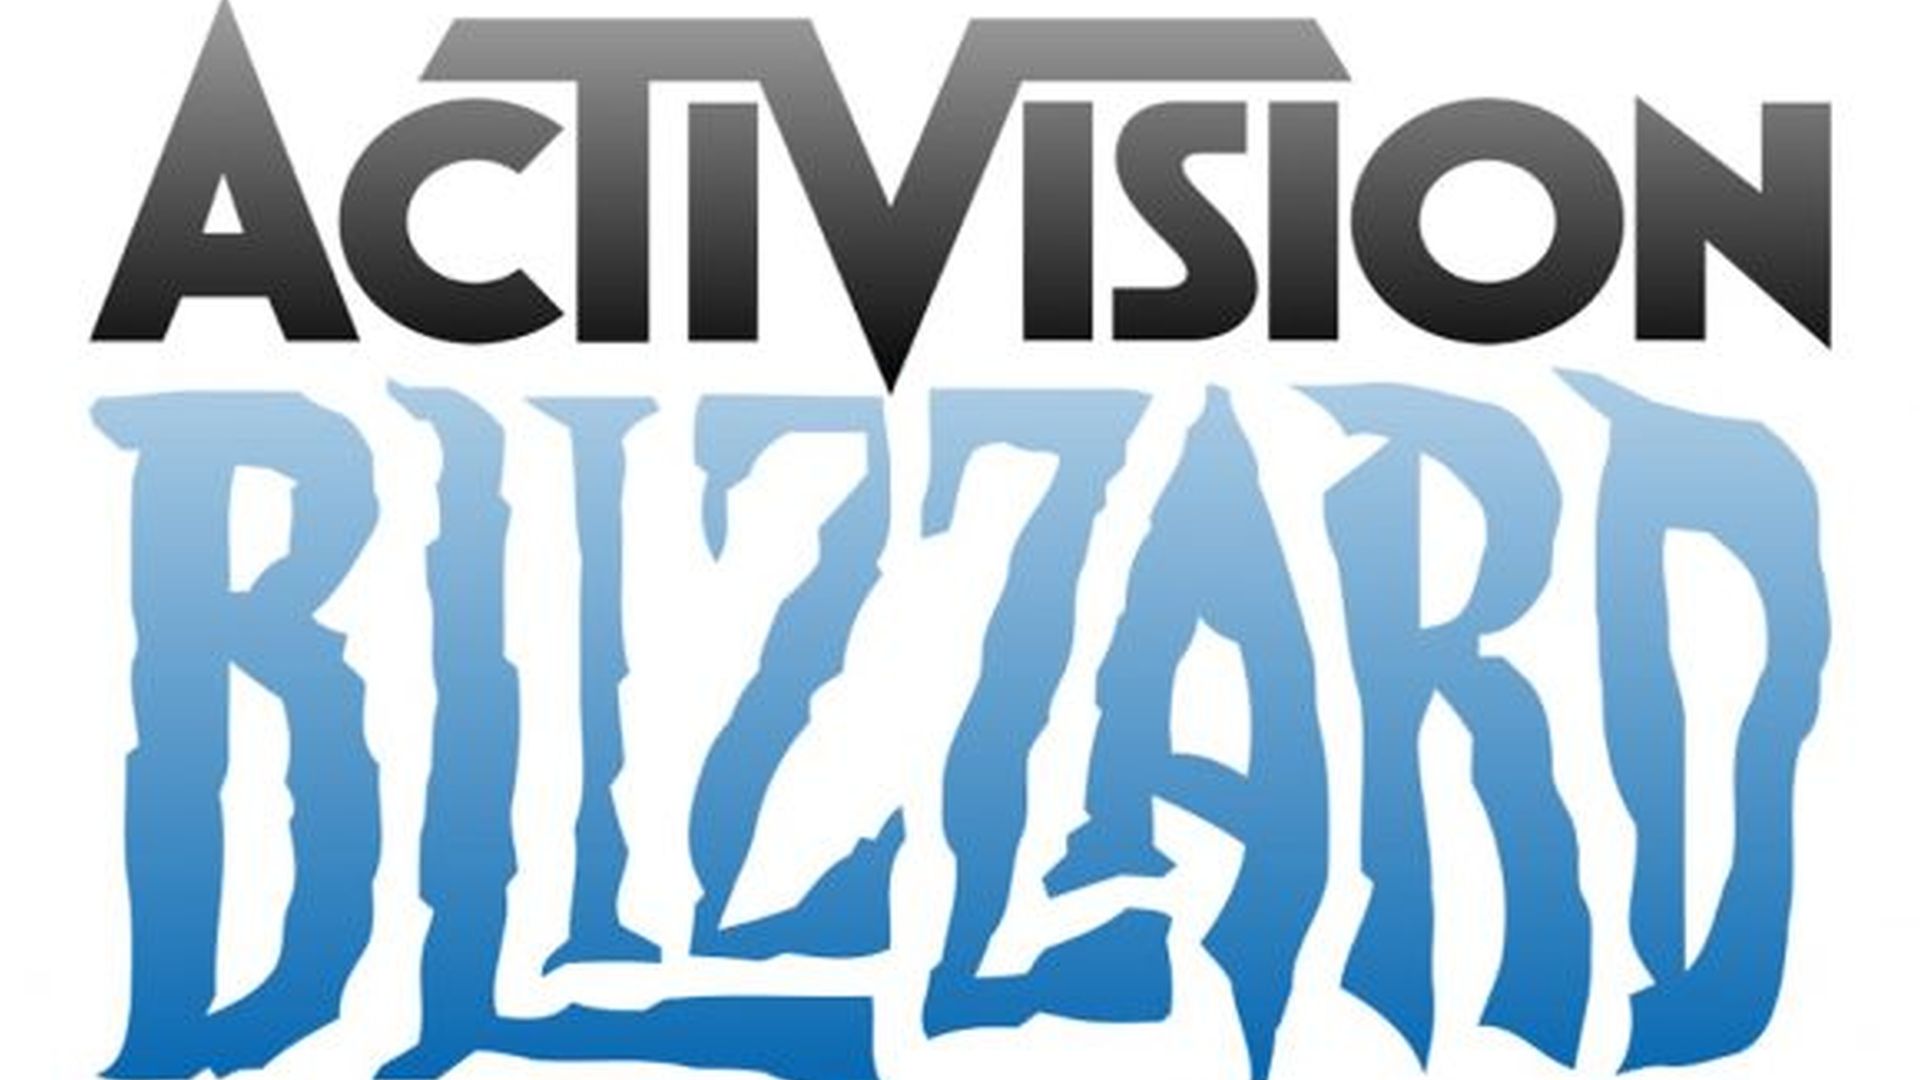 Activision Blizzard CEO apologises for “tone deaf” lawsuit response